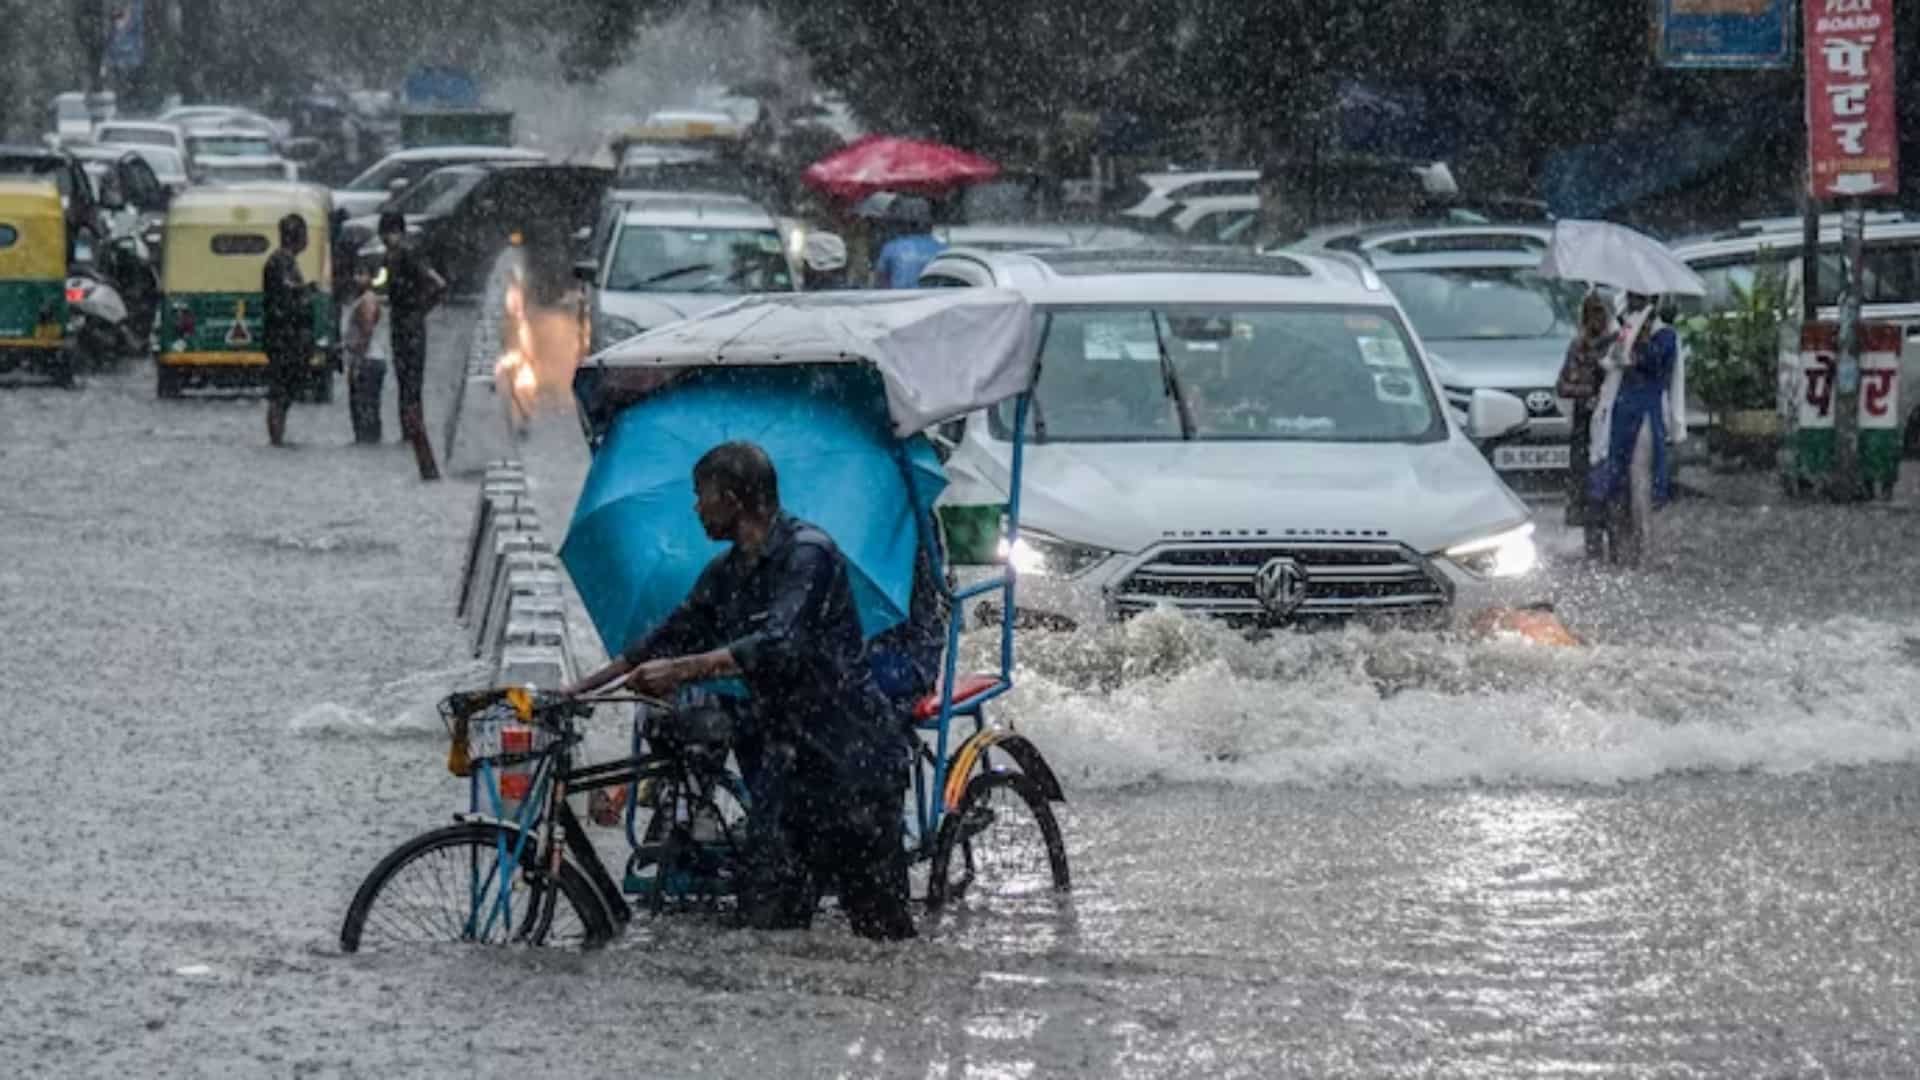 WATCH | ‘Delhi deluge’: Season’s first heavy rainfall submerges capital in flooded chaos